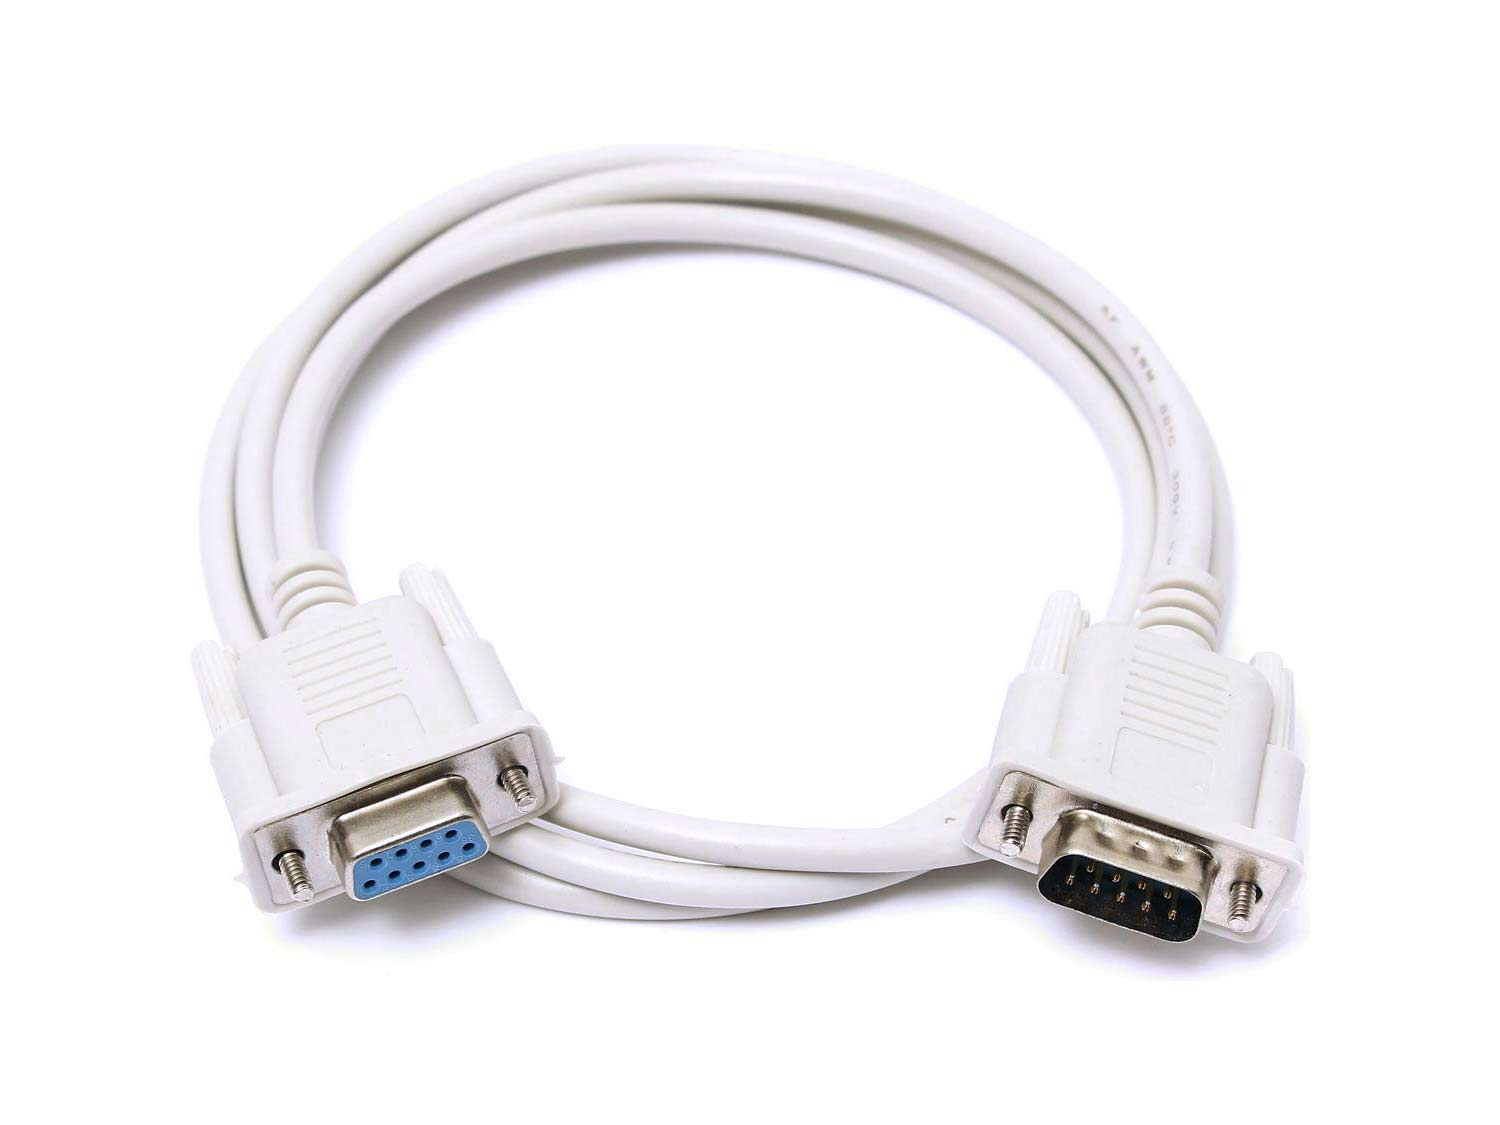 Meatest RS232 cable